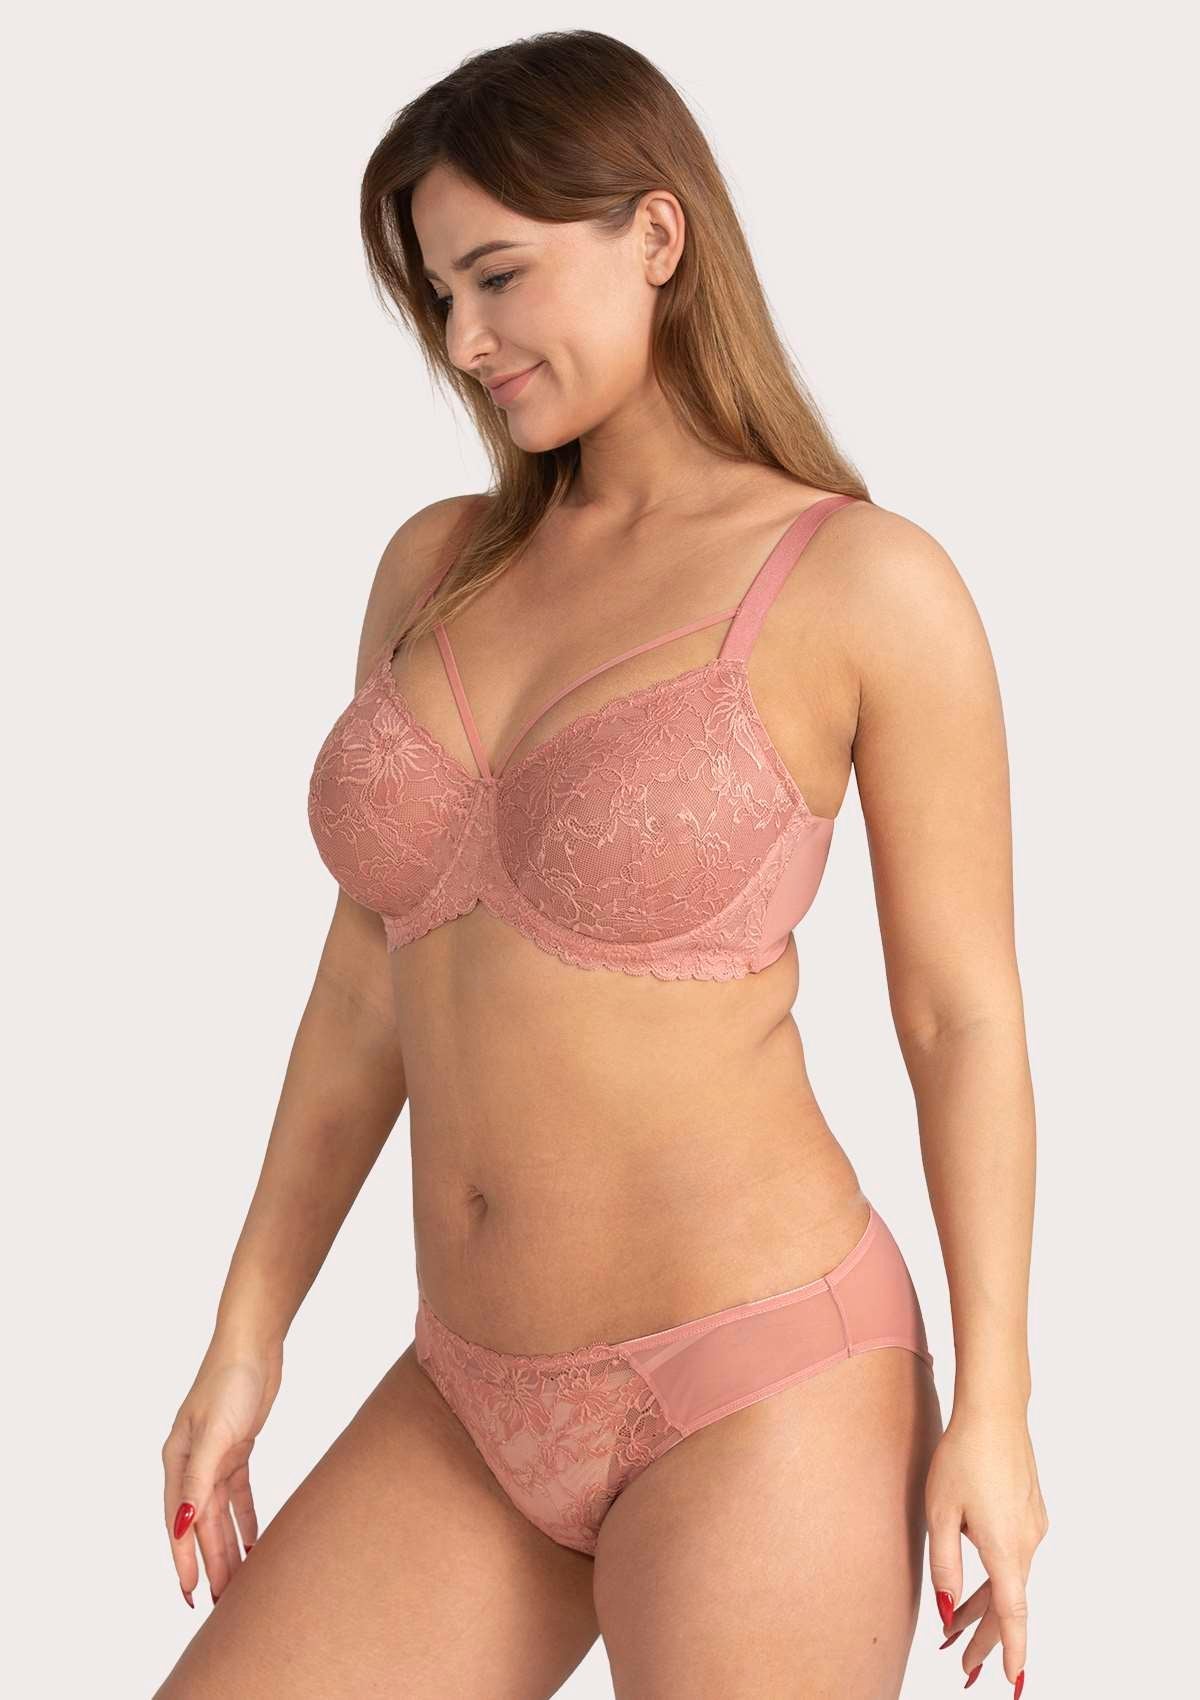 HSIA Pretty In Petals Lace Bra And Panty Sets: Bra For Big Boobs - Light Coral / 38 / C